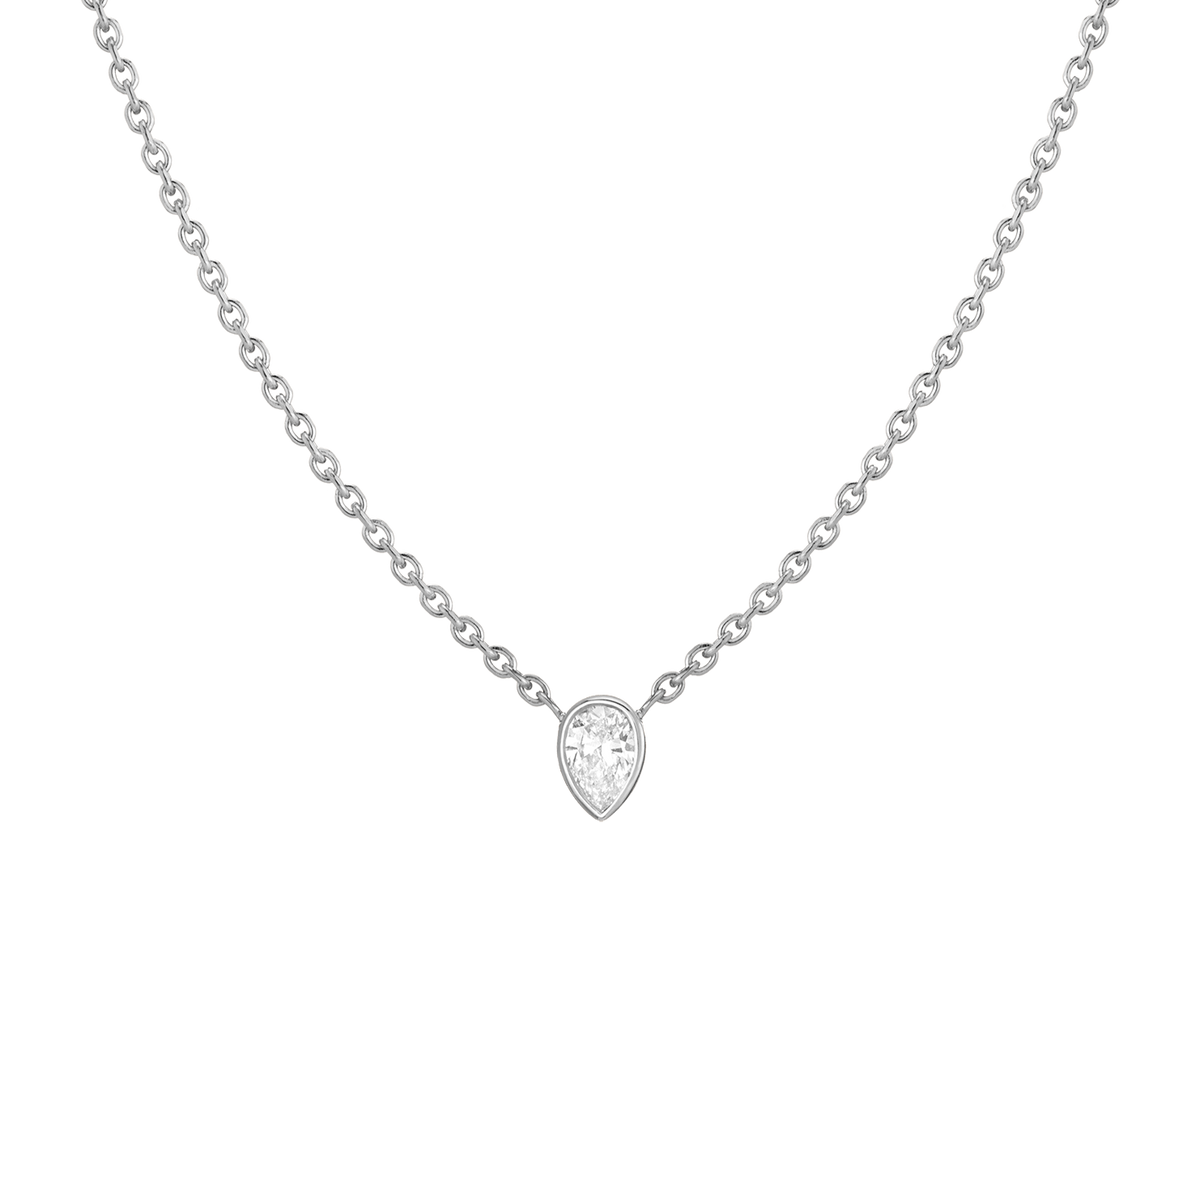 35 Carat Pear Diamond Necklace Solid White Gold 14K